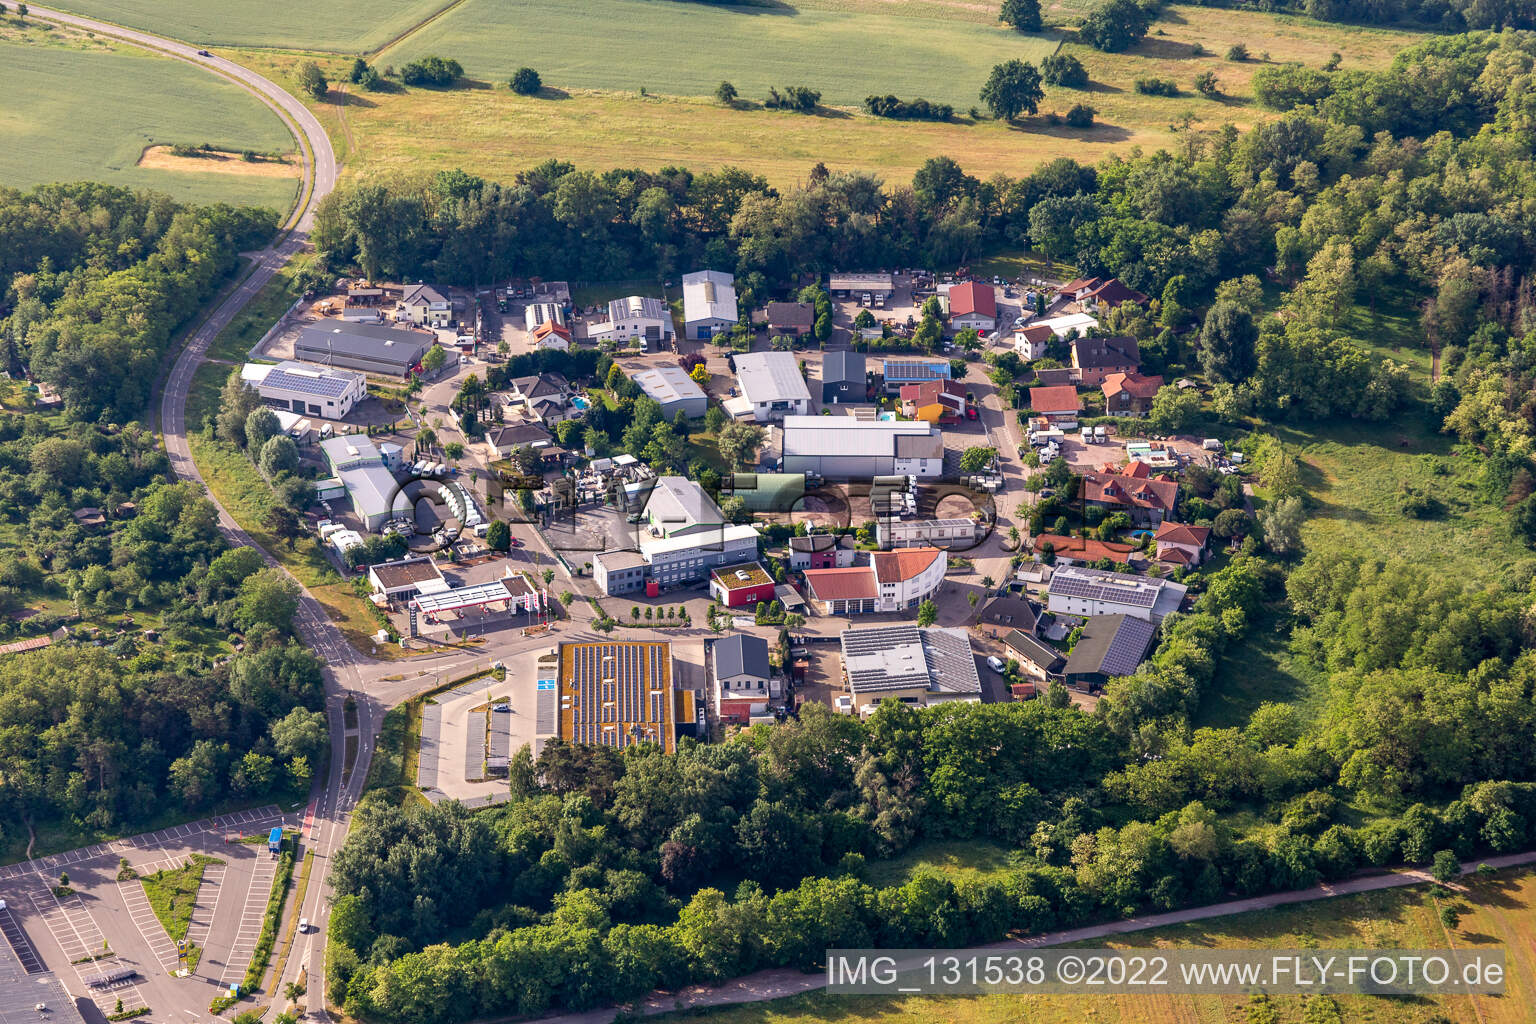 Aerial photograpy of Mittelwegring commercial area in Jockgrim in the state Rhineland-Palatinate, Germany